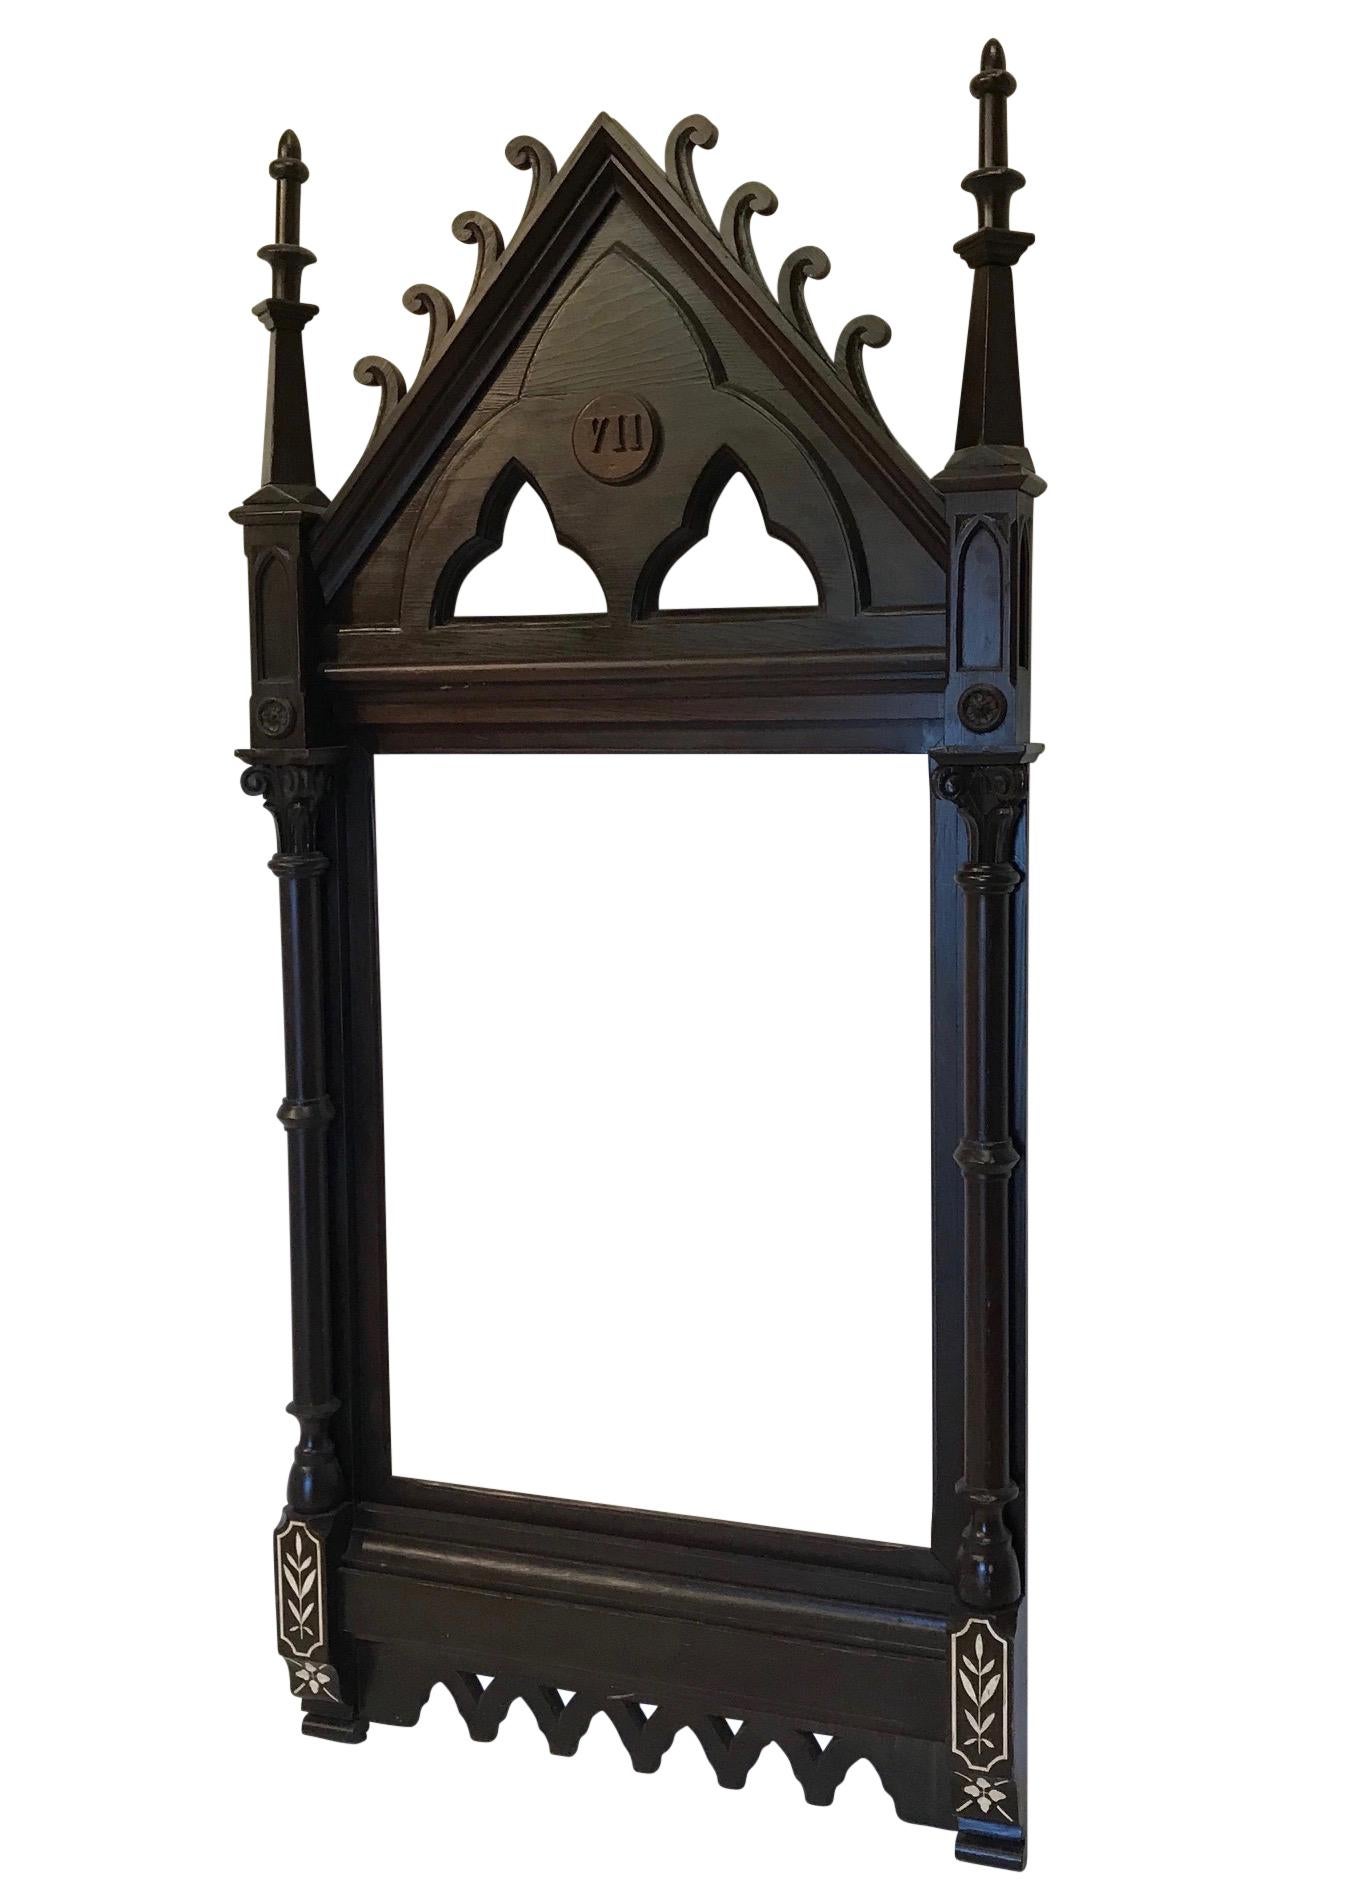 Gothic style mirror or picture frame, black with white accenting. Originally from a California Church framing Stations of the Cross, frames are stained pine, the Roman numerals can be easily removed if desired.
California, circa 1900.
There are 3